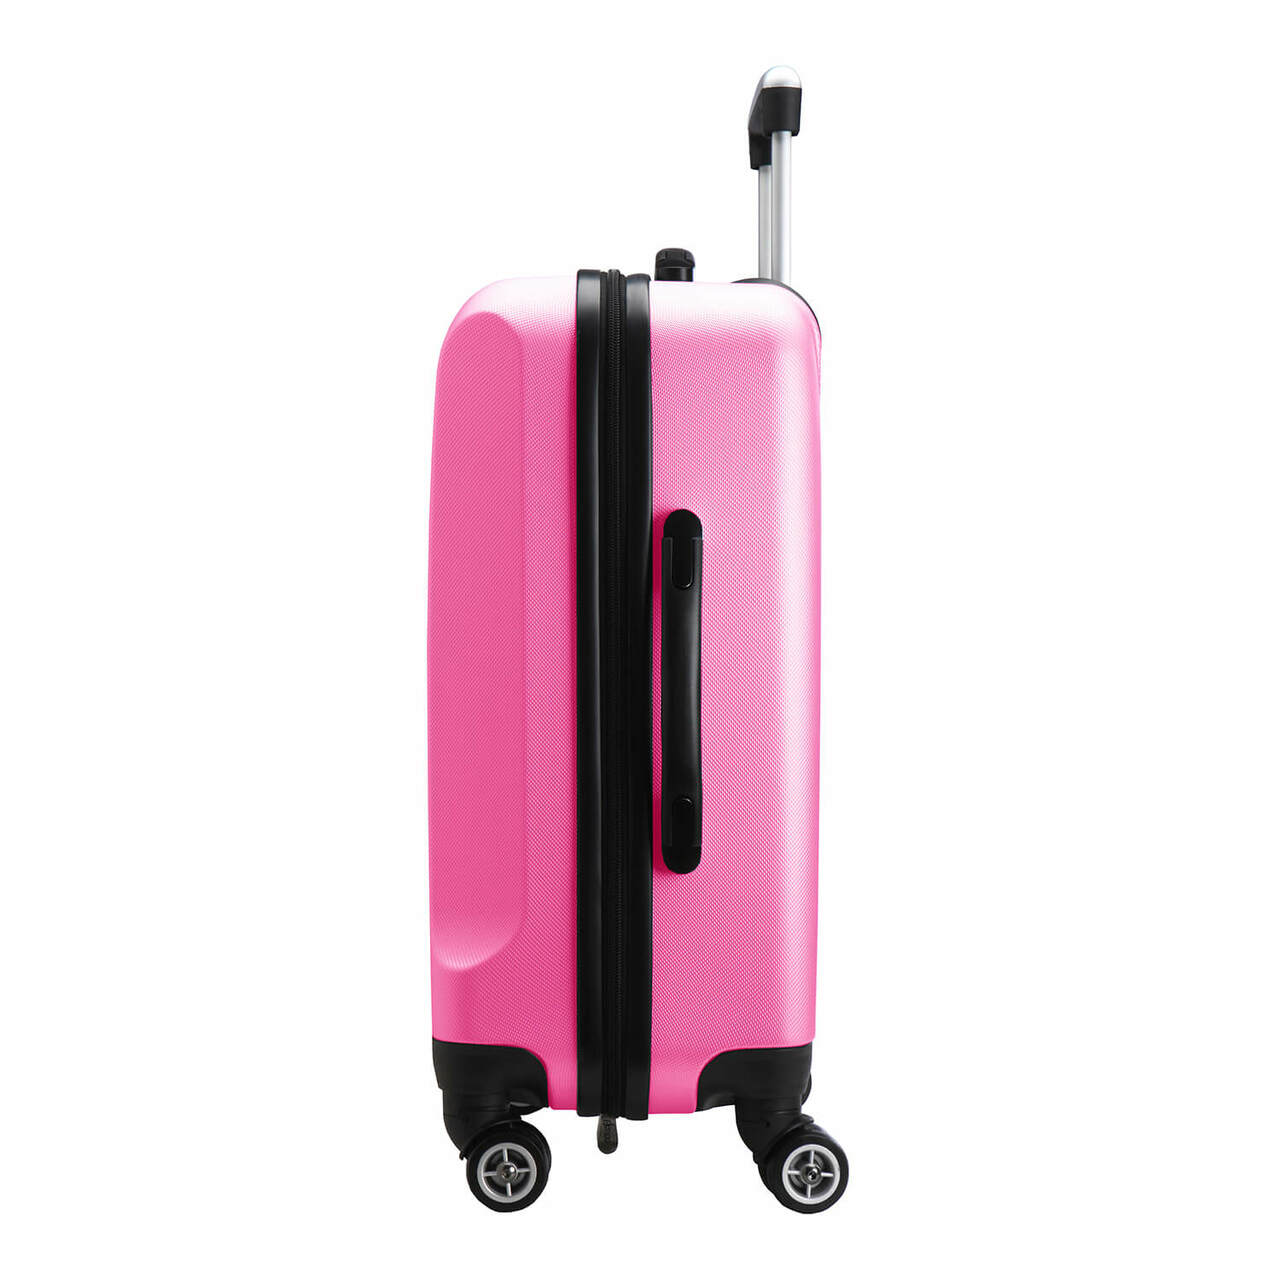 Boston College Eagles 20" Pink Domestic Carry-on Spinner